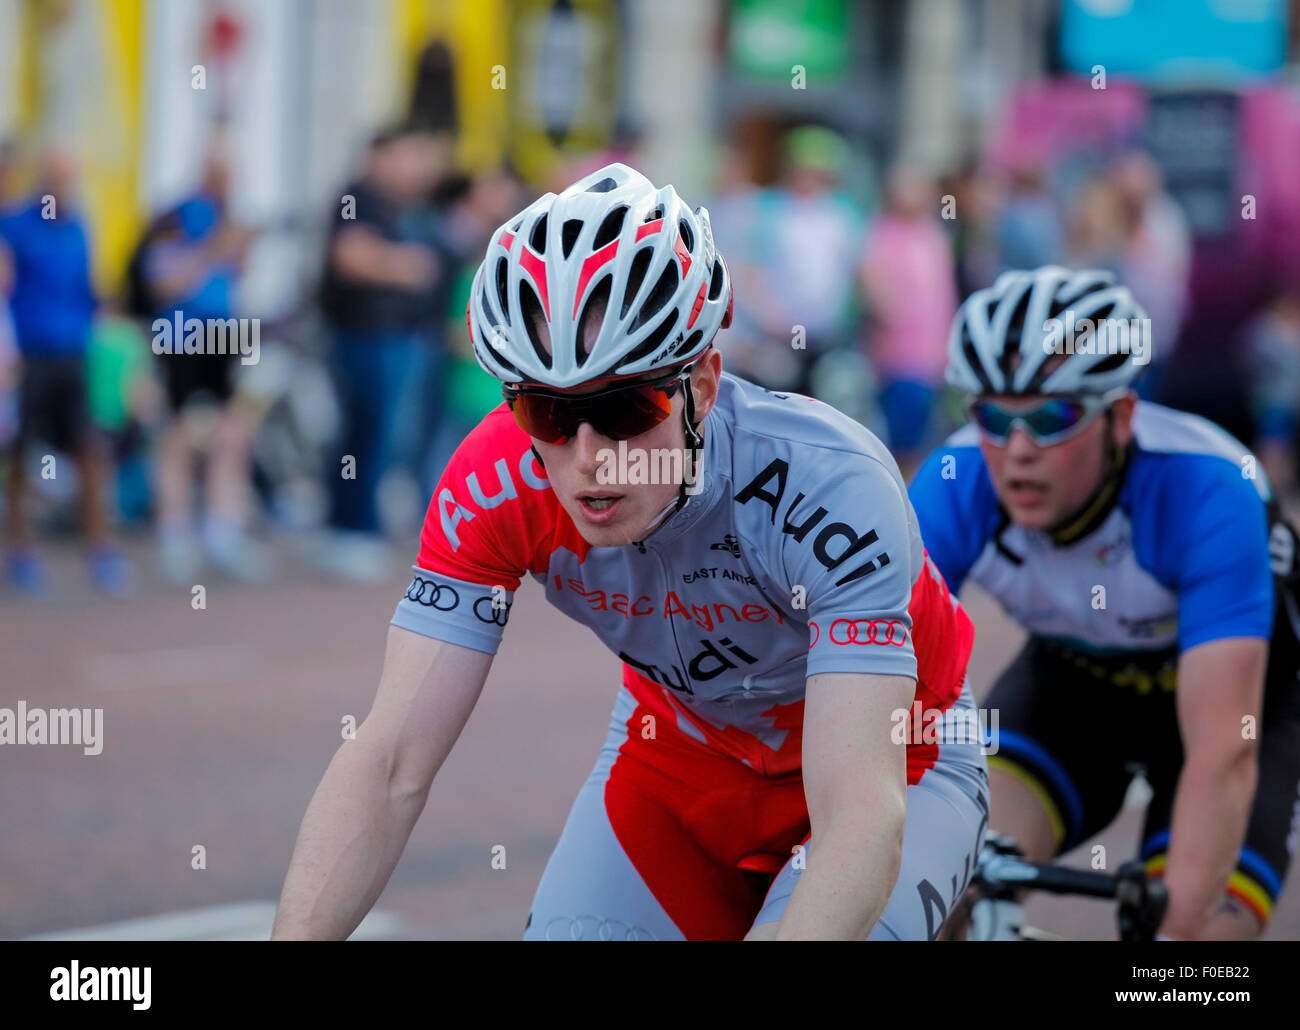 Bangor, Co. Down, Northern Ireland. 13th August 2015. The Seat Criterium Super 7 Final cycle race is abandoned after a competitor is injured. Credit:  J Orr/Alamy Live News Stock Photo